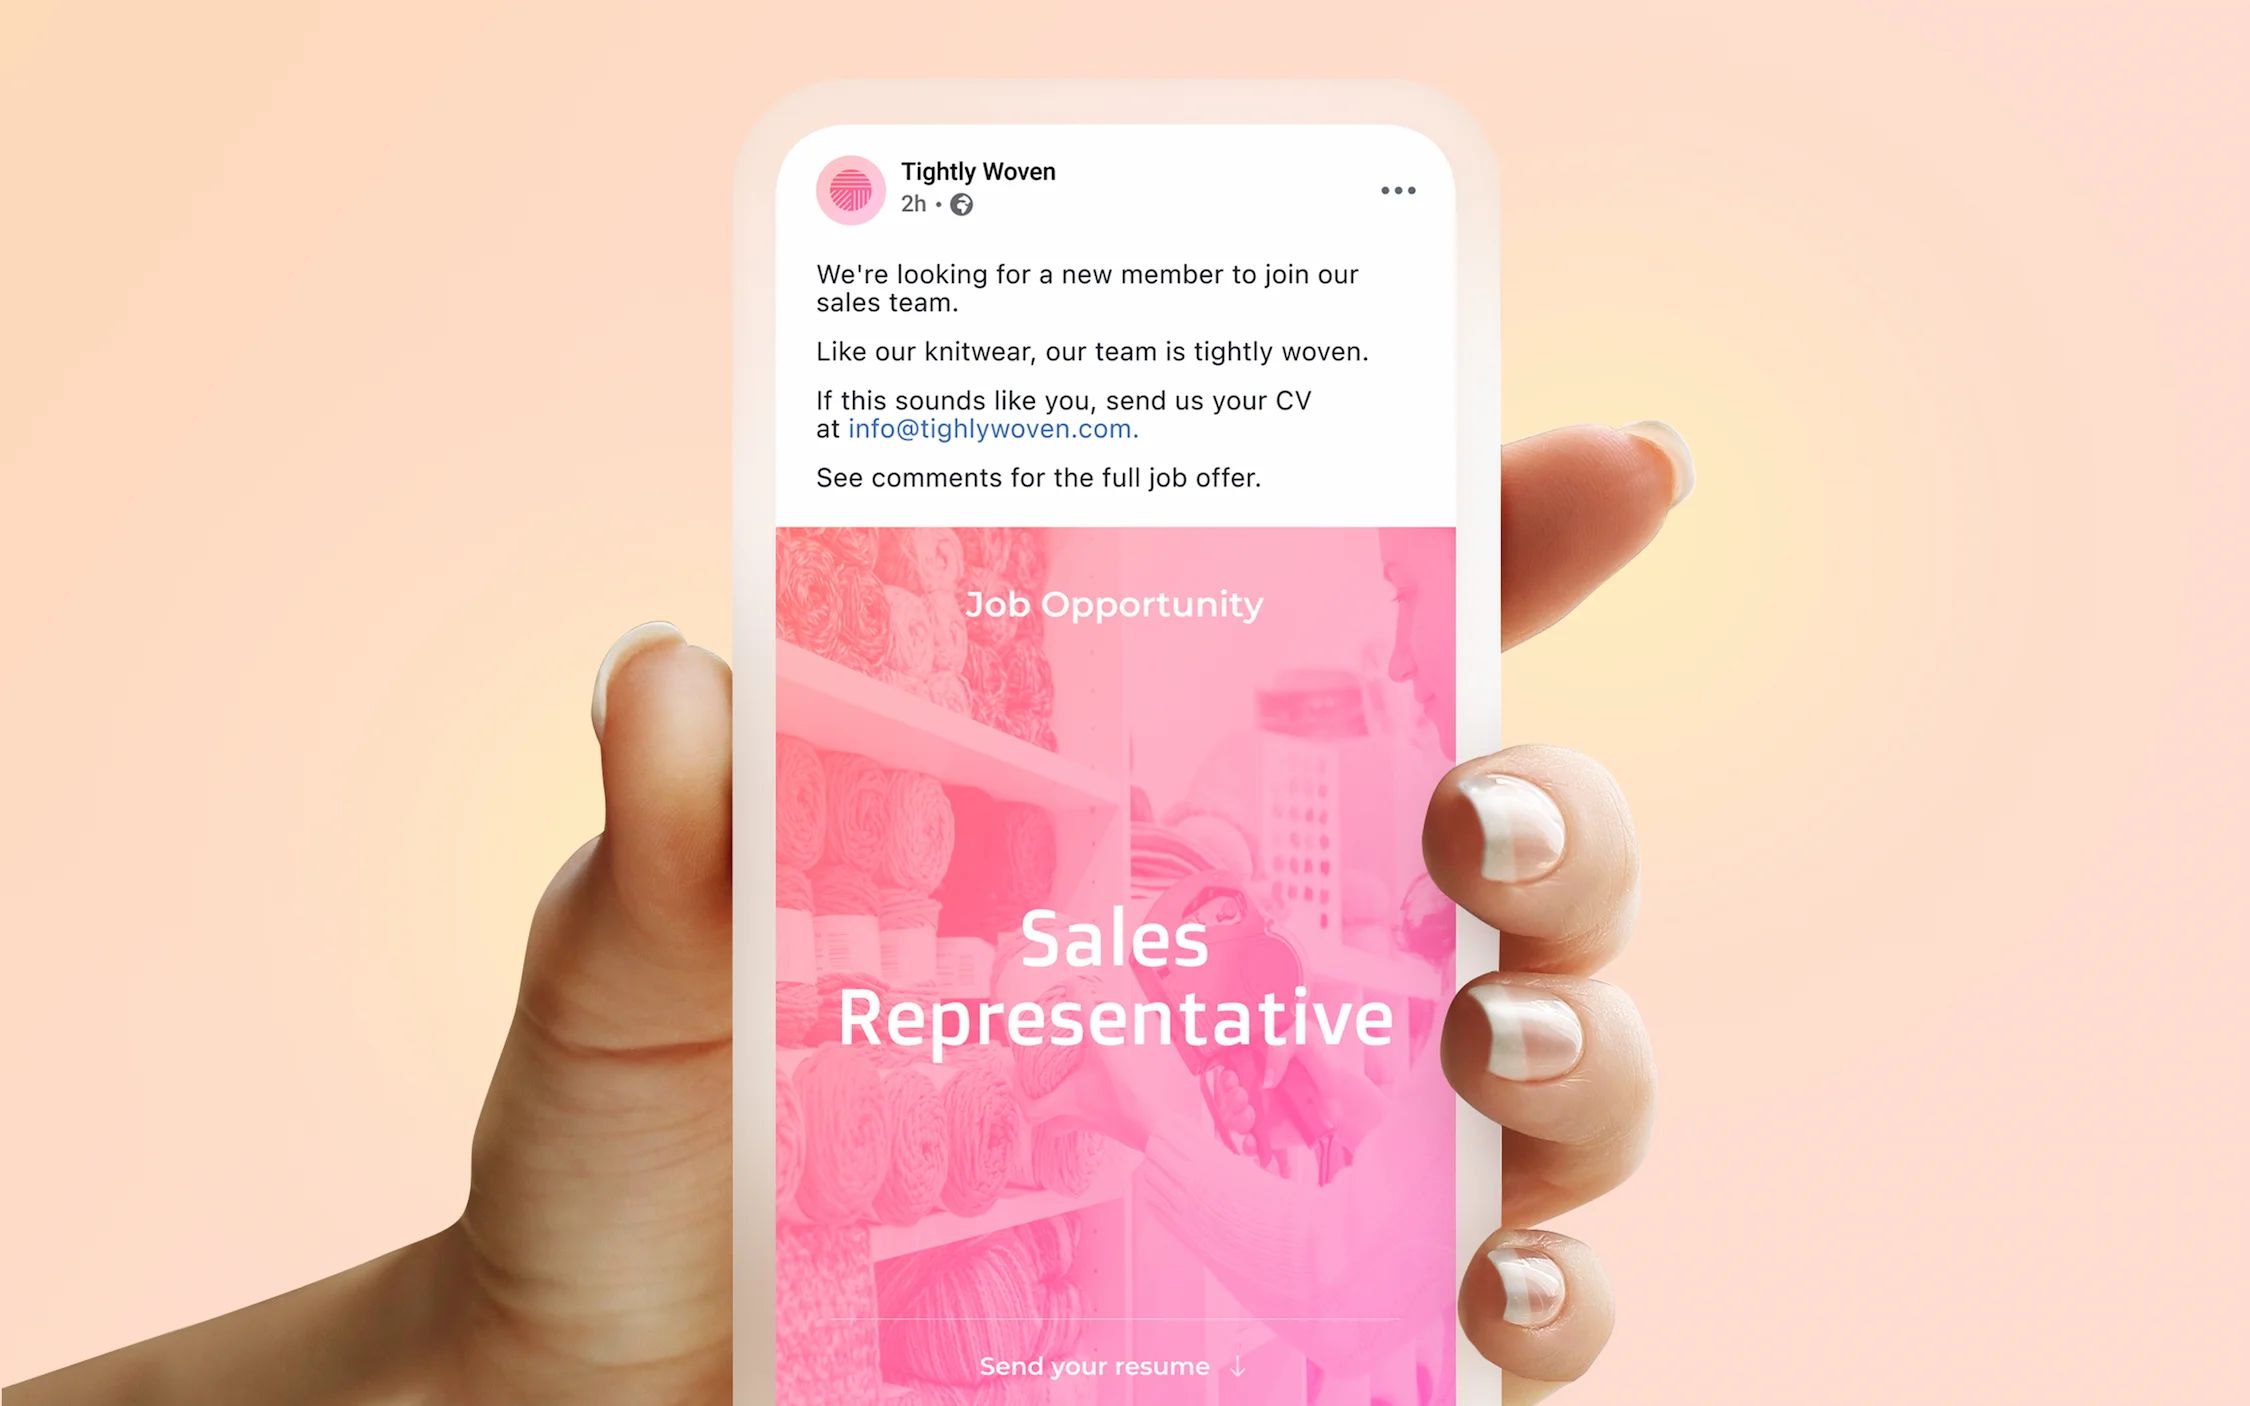 Hand holding a mobile device, on screen we see a Facebook post with photo of a retail store with a pink filter